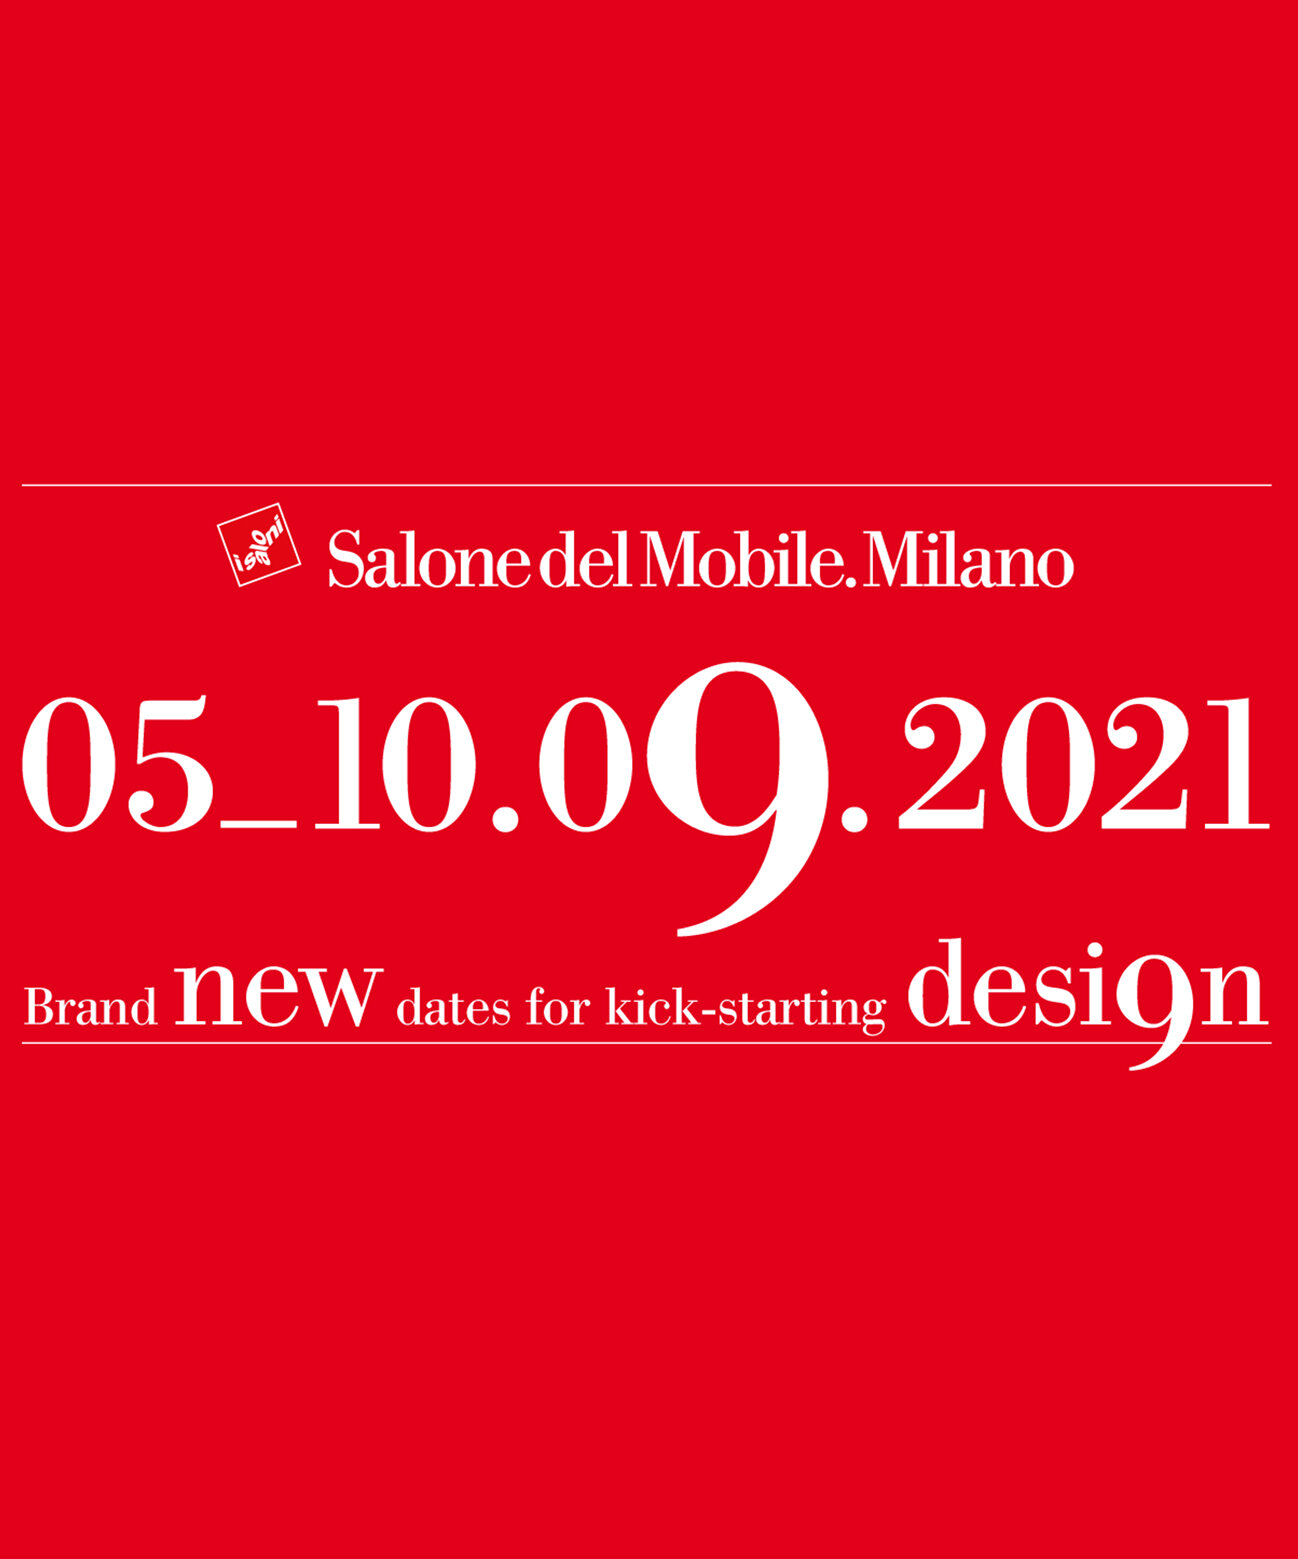 uncertainty in milan as companies pull out of september's salone del mobile